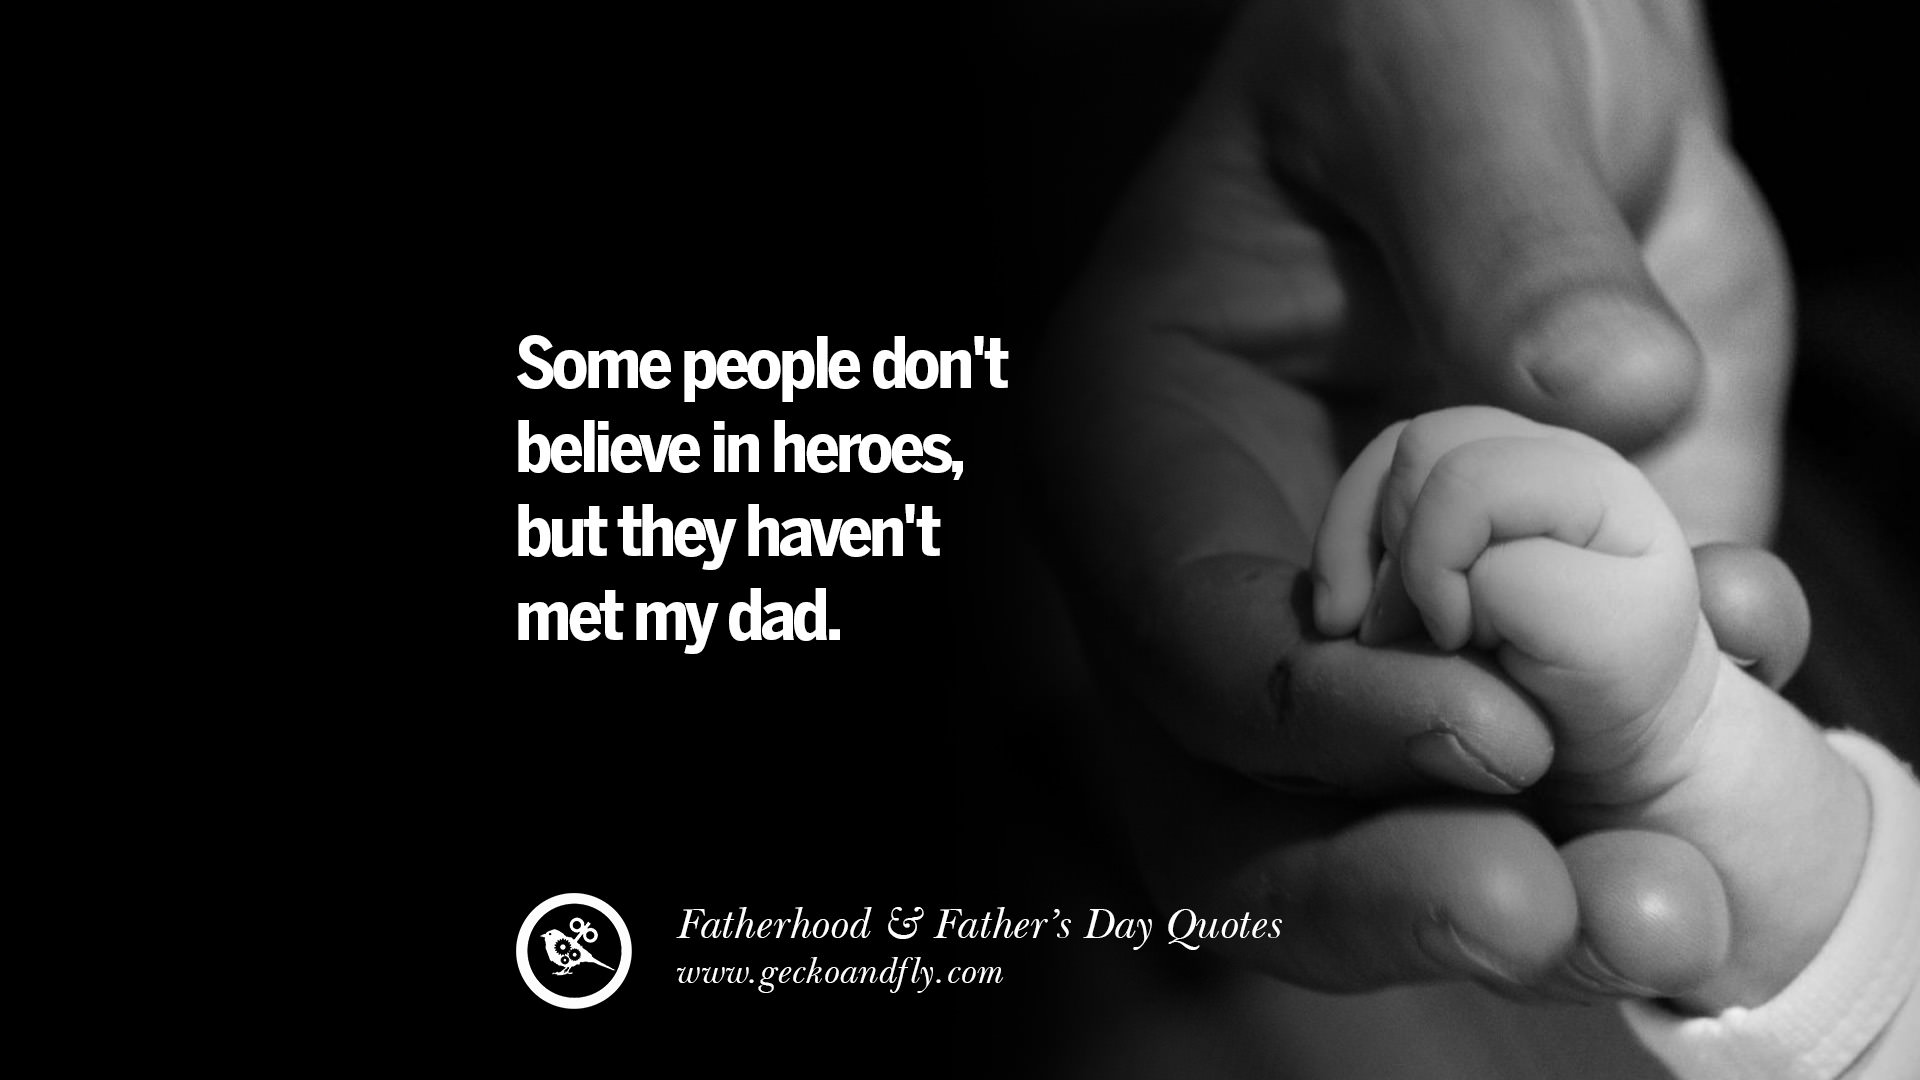 50-inspiring-and-funny-father-s-day-quotes-on-fatherhood